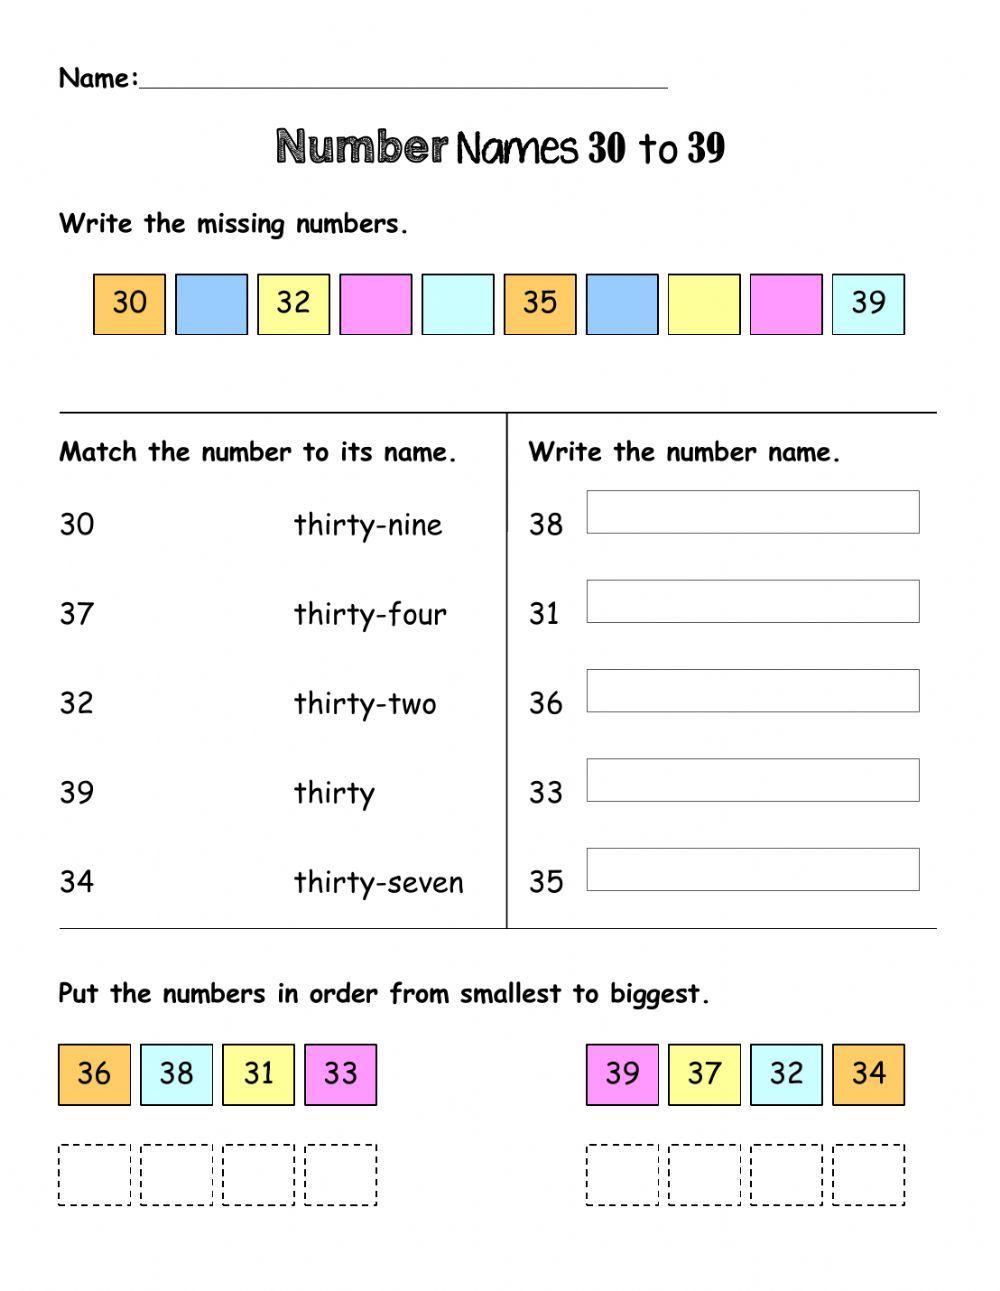 Number Names 30 to 39